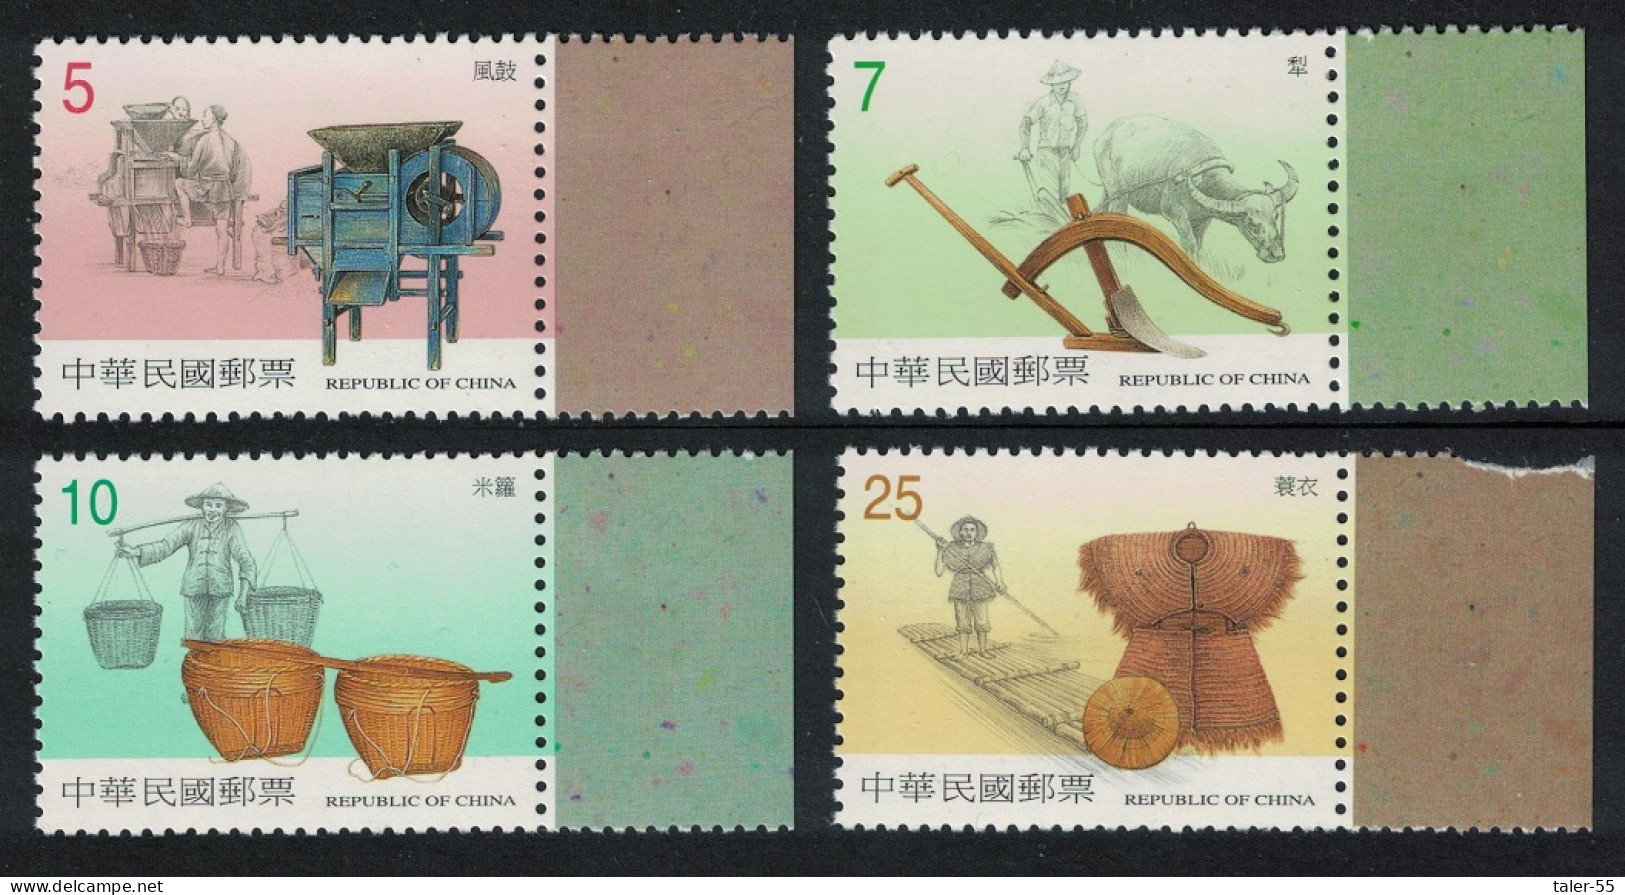 Taiwan Early Agricultural Implements 4v Margins 2001 MNH SG#2715-2718 - Neufs